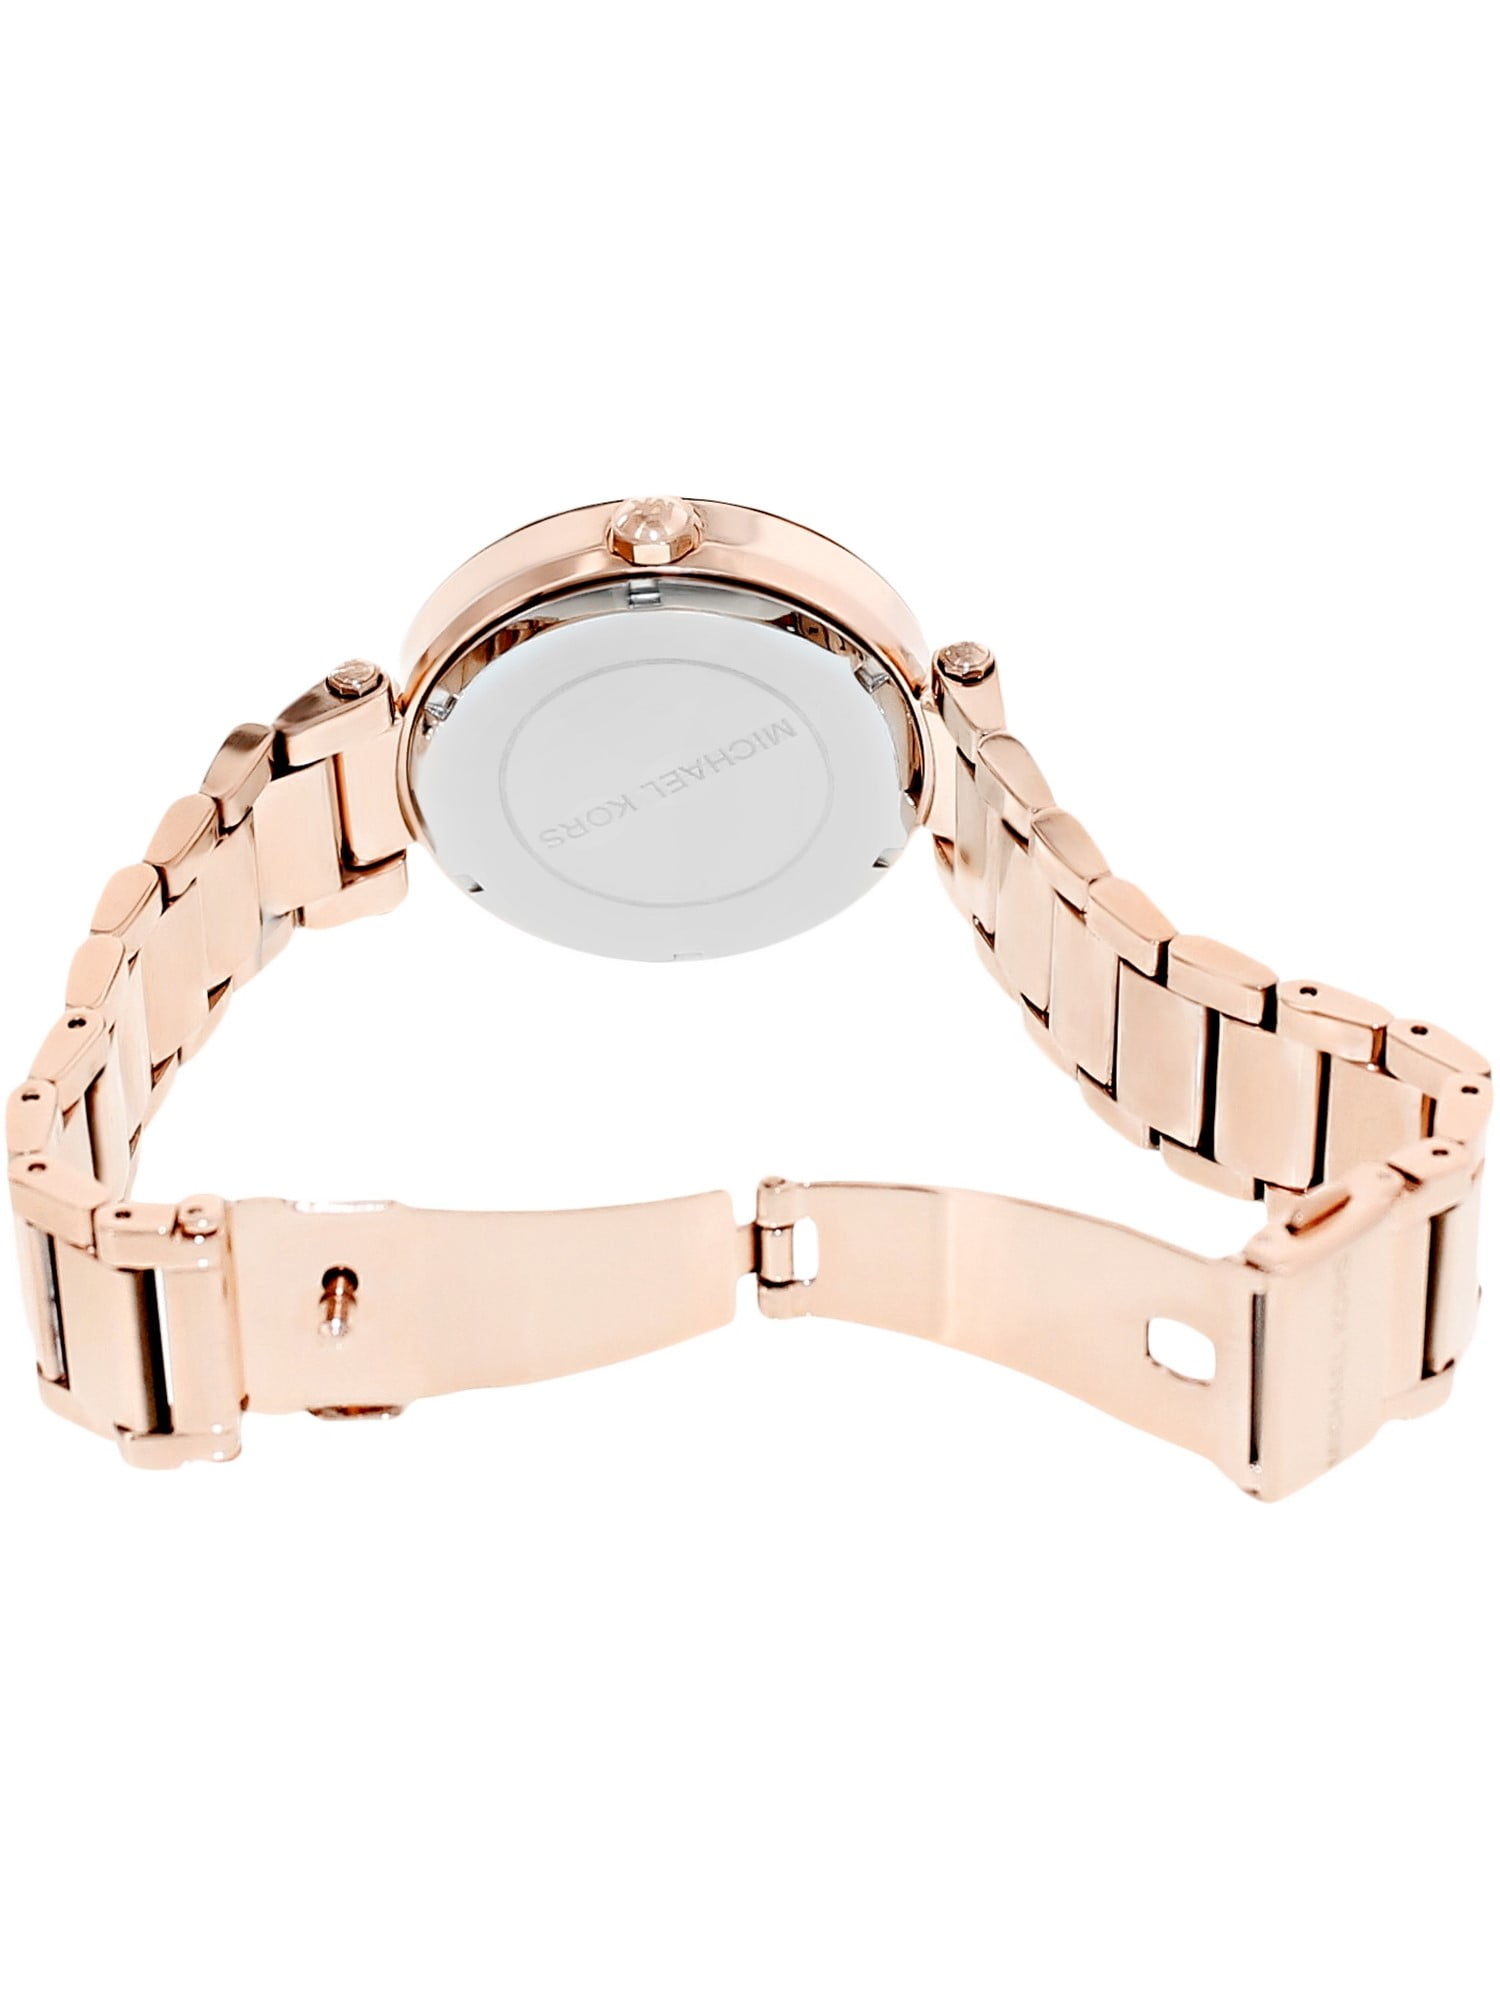 Michael Kors Parker Rose Gold Stainless Steel Chronograph Watch MK5896   MYER